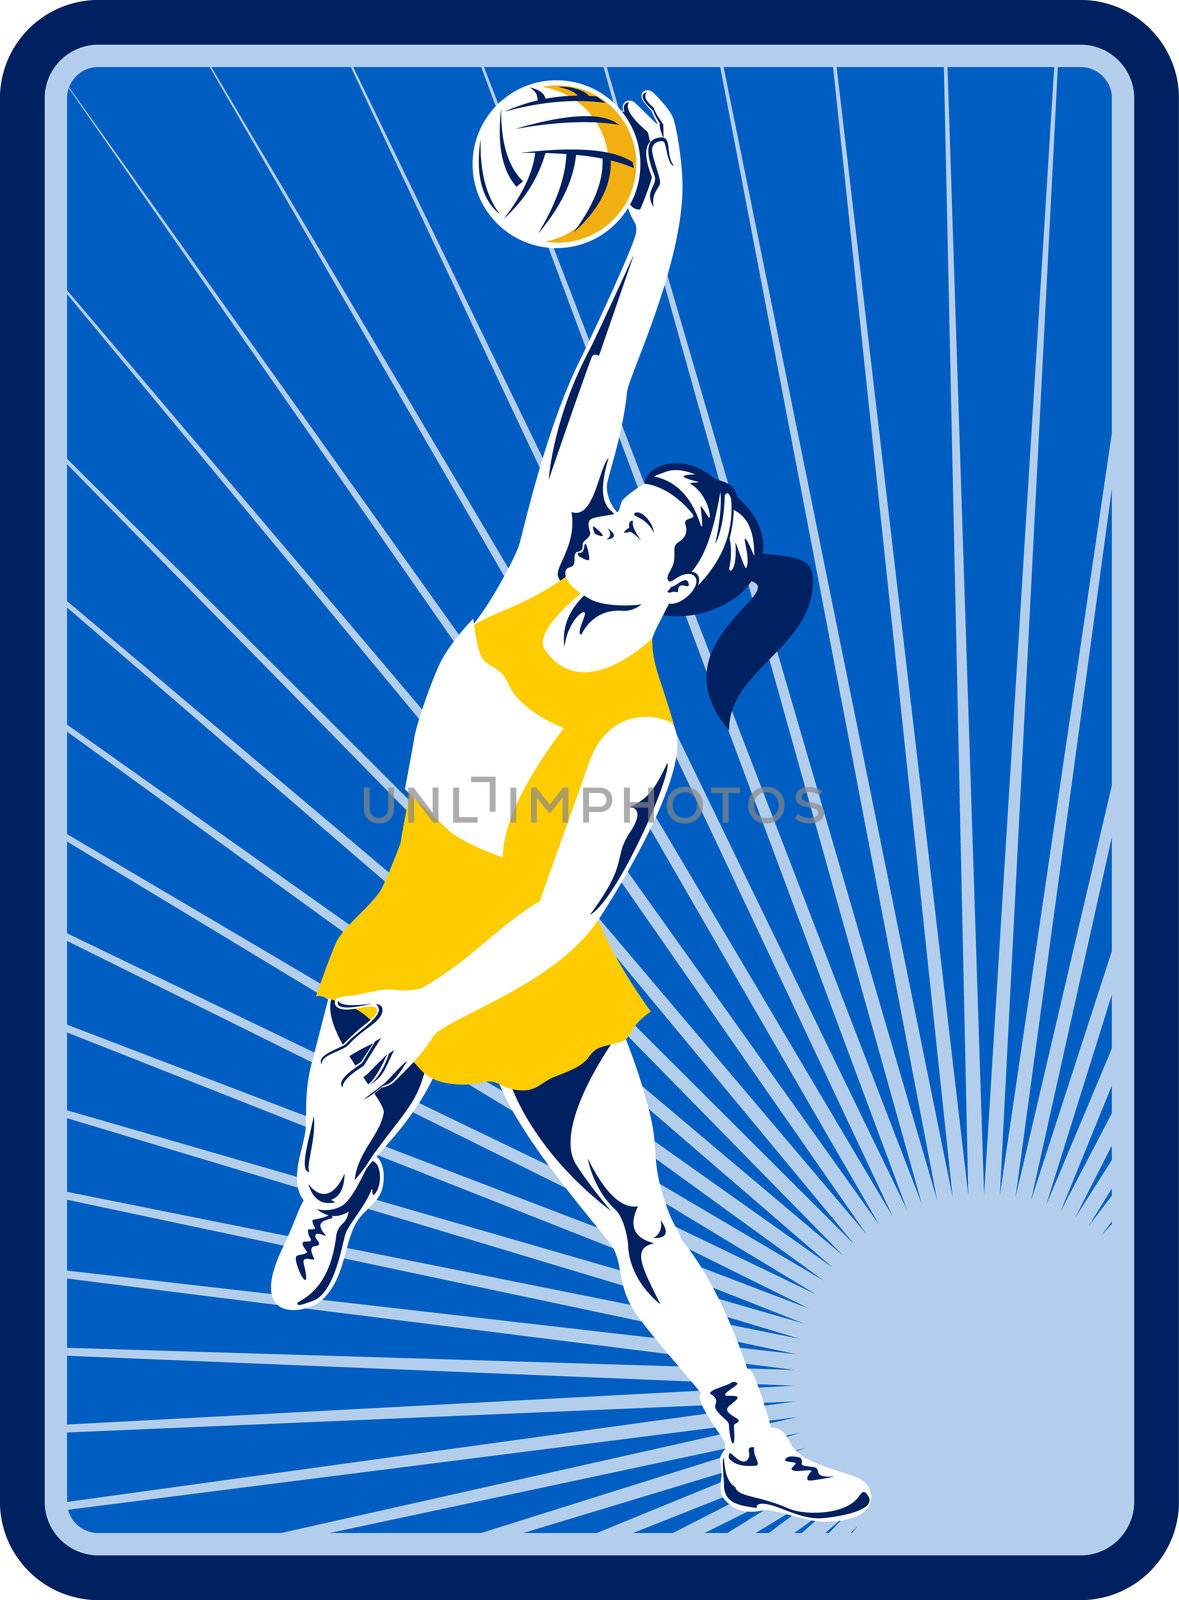 illustration of a Netball player rebounding jumping for ball with sunburst in background